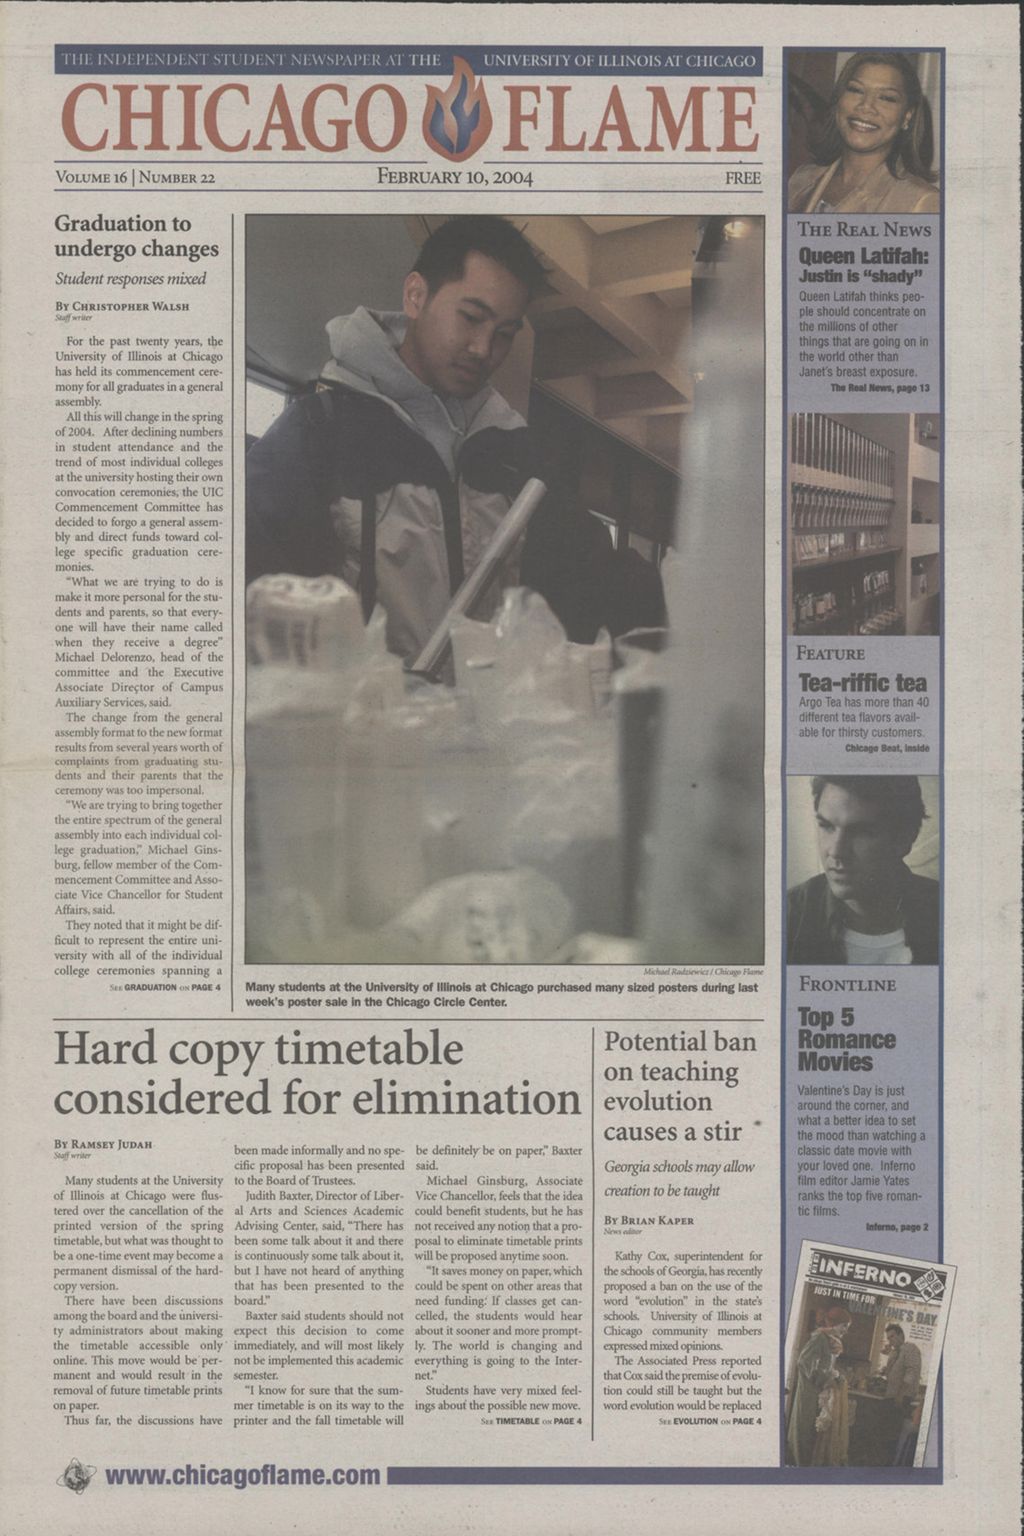 Chicago Flame (February 10, 2004)